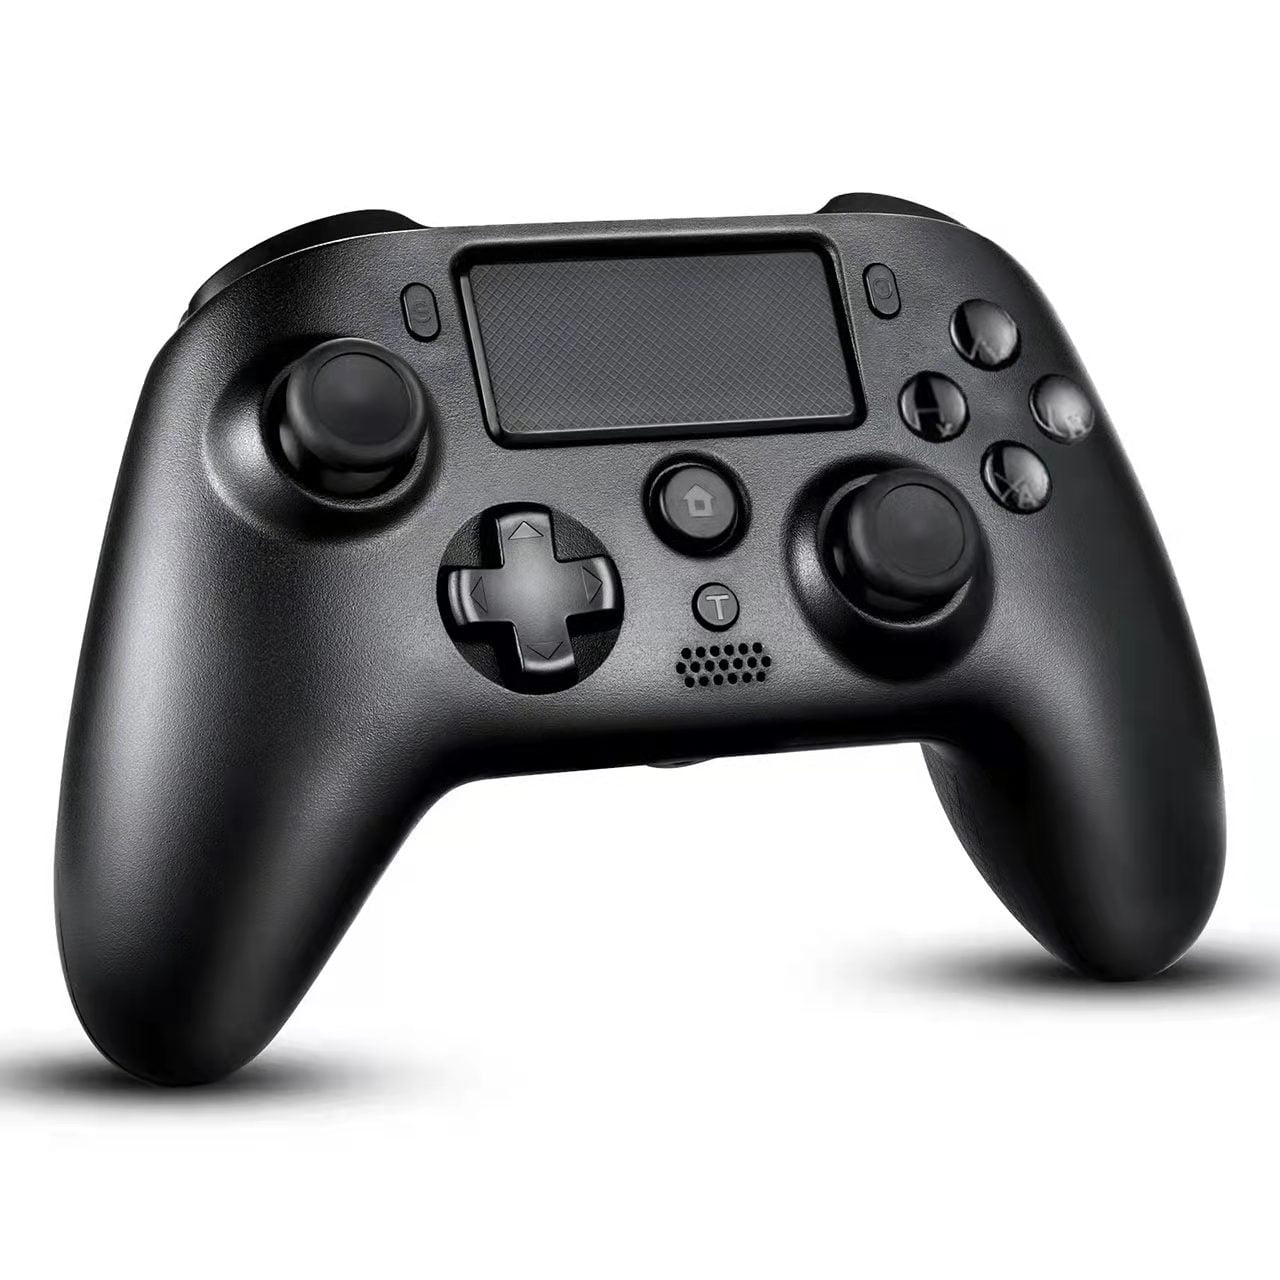 frio Resbaladizo Patentar PS4 Elite Controller with Back Paddles PS4 Controller Wireless 1200mAh  Remote Bluetooth Control Joystick Modded Custom Gamepad with Turbo  Compatible with Playstation 4/Slim/Pro/PC/Android/iOS Black - Walmart.com